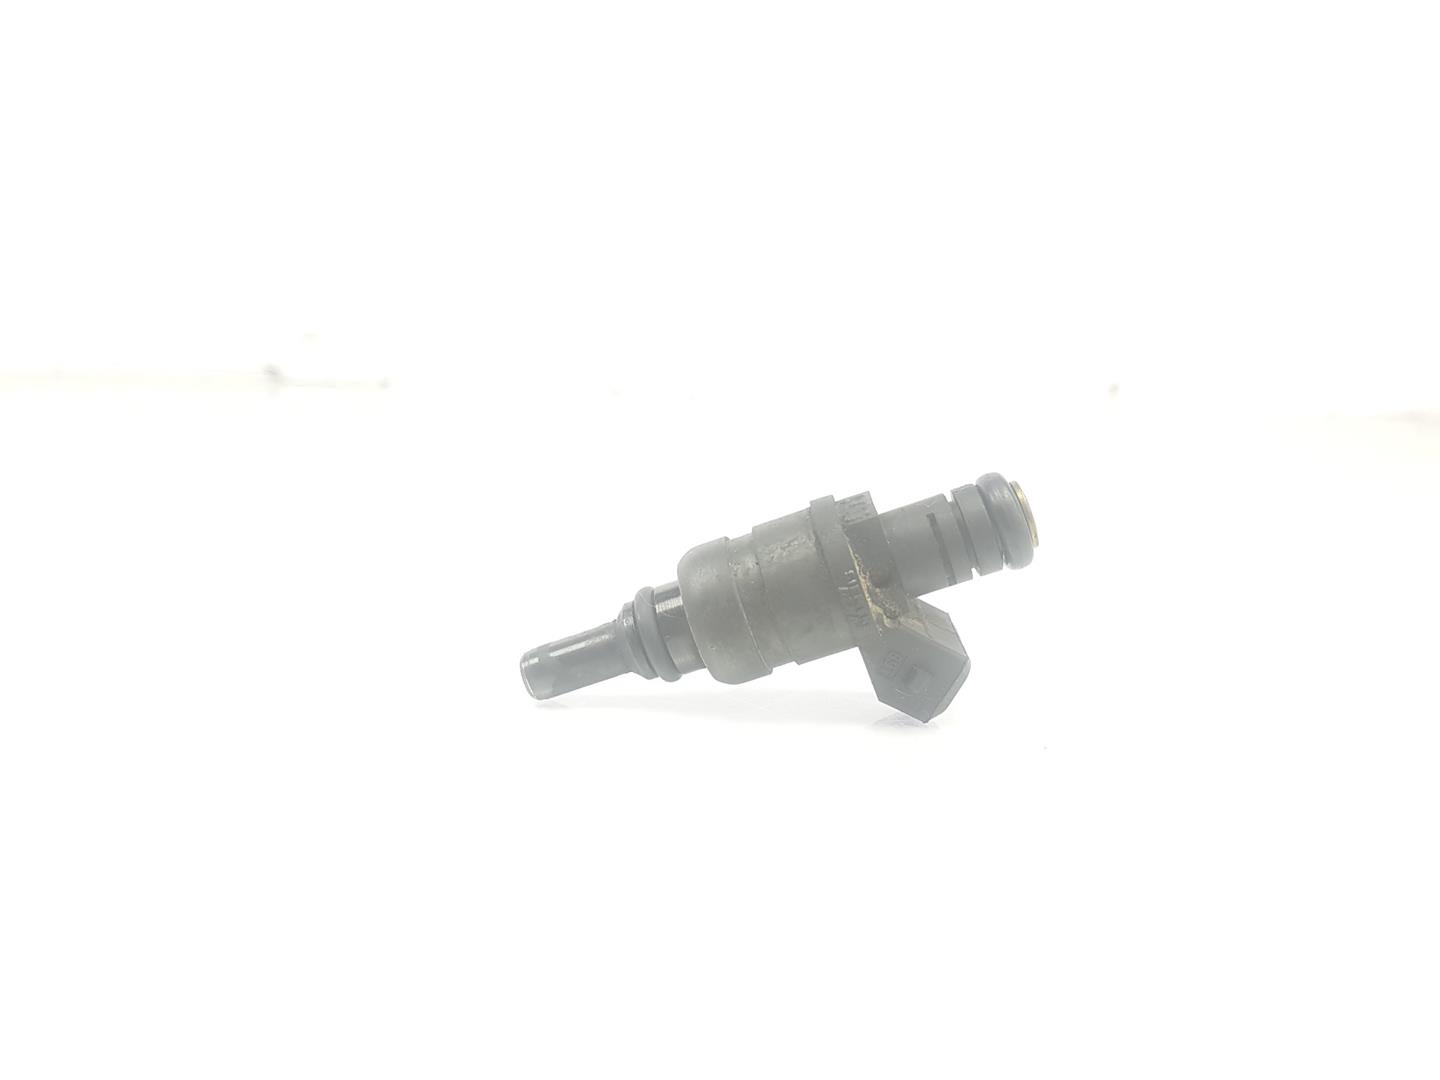 BMW 3 Series E46 (1997-2006) Fuel Injector 11001714564, 1714564 24193803